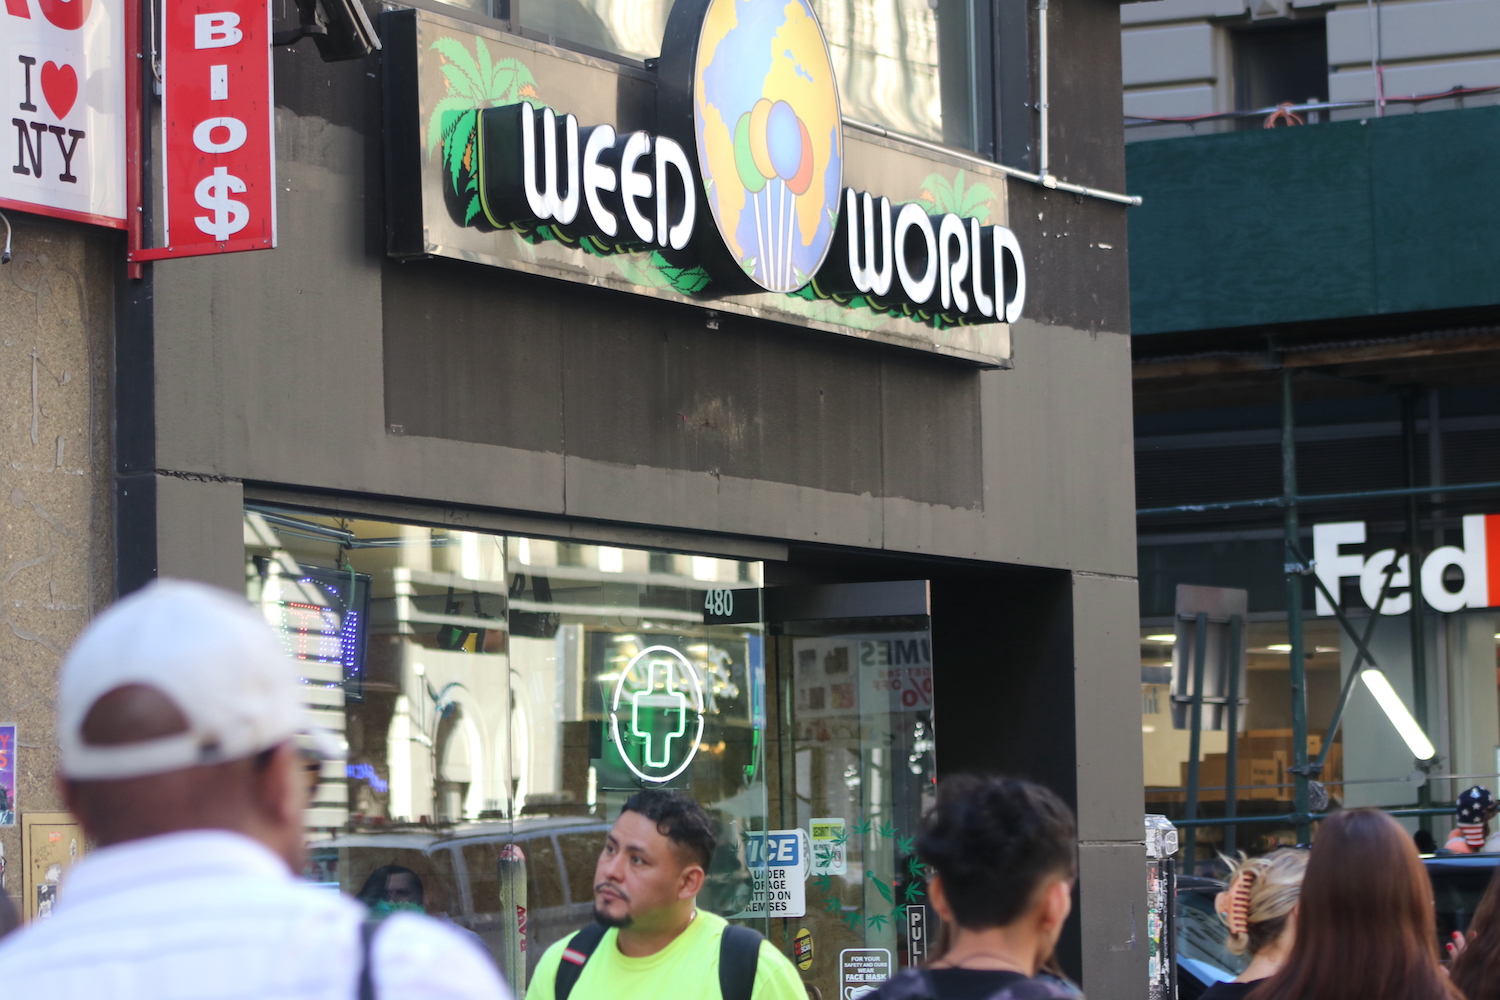 Weed World cannabis dispensary in New York City